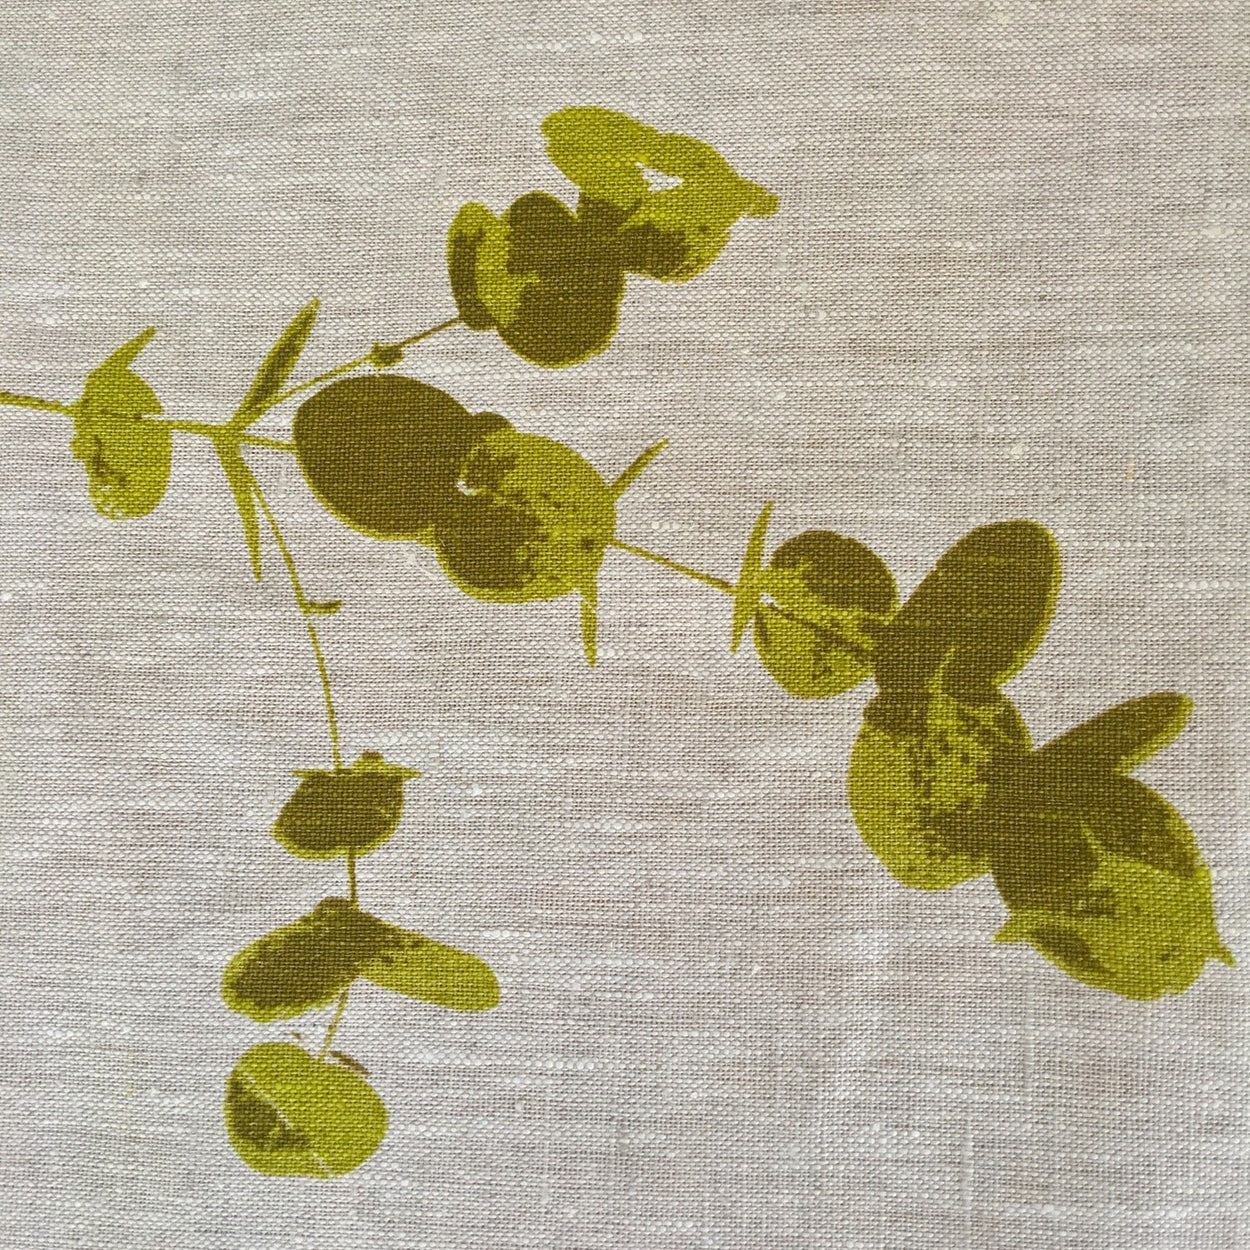 Photo of gum leaves screenprinted on a cushion cover in close-up.